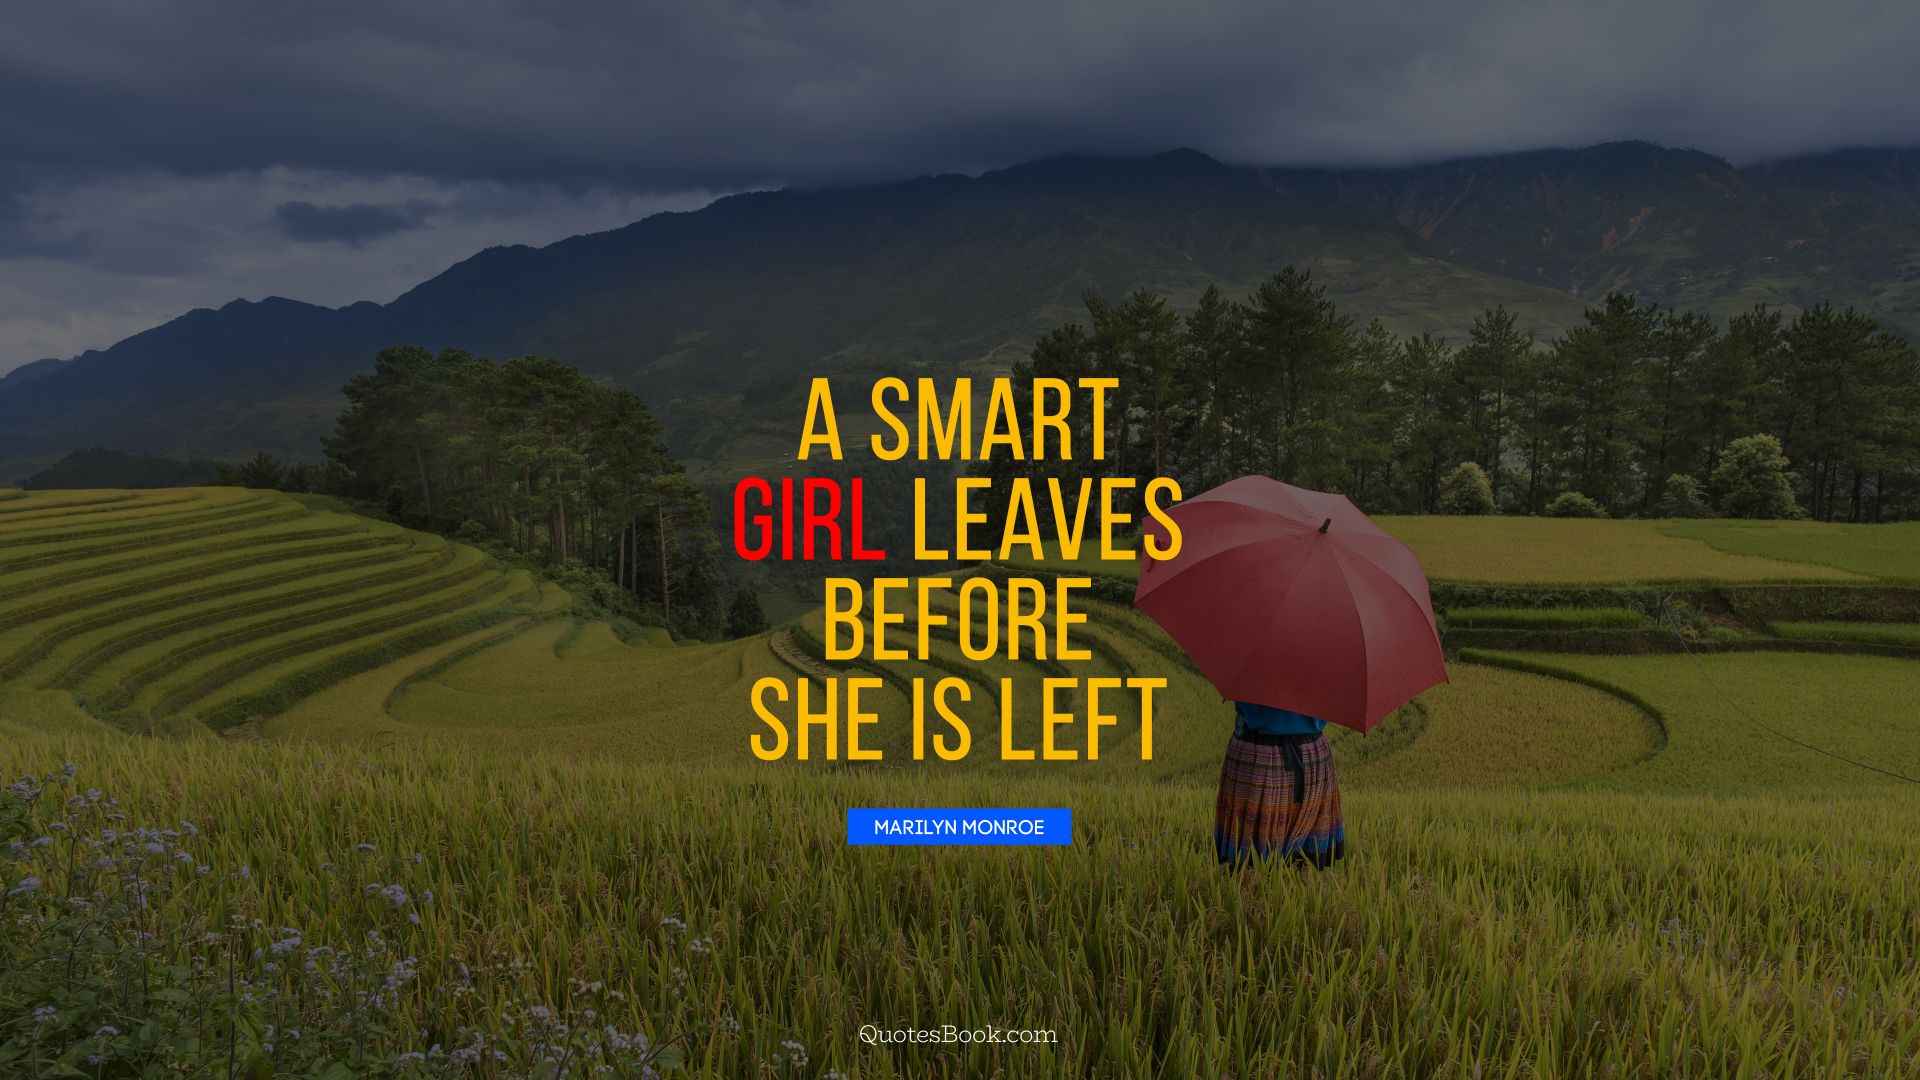 A smart girl leaves before she is left. - Quote by Marilyn Monroe